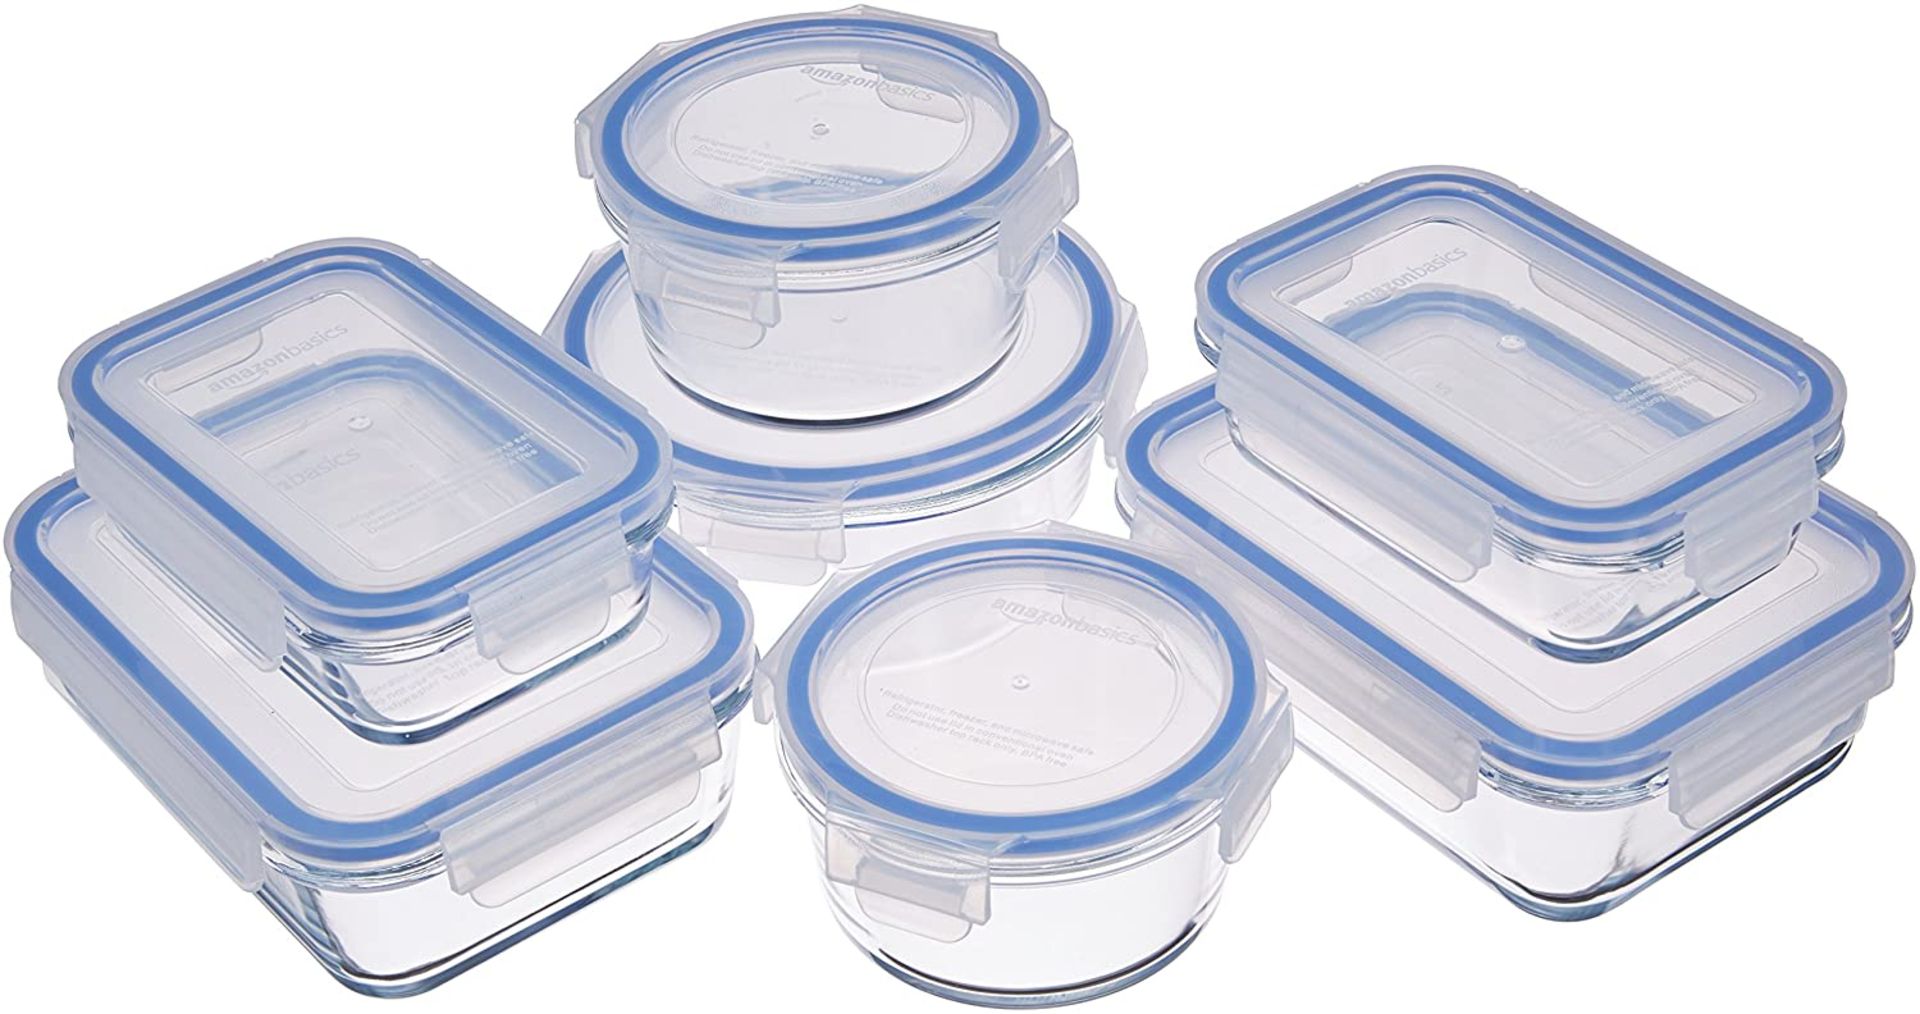 AmazonBasics Glass Locking Food Storage Containers 14 Pieces (7 Containers + 7 Lids), BPA-free plast